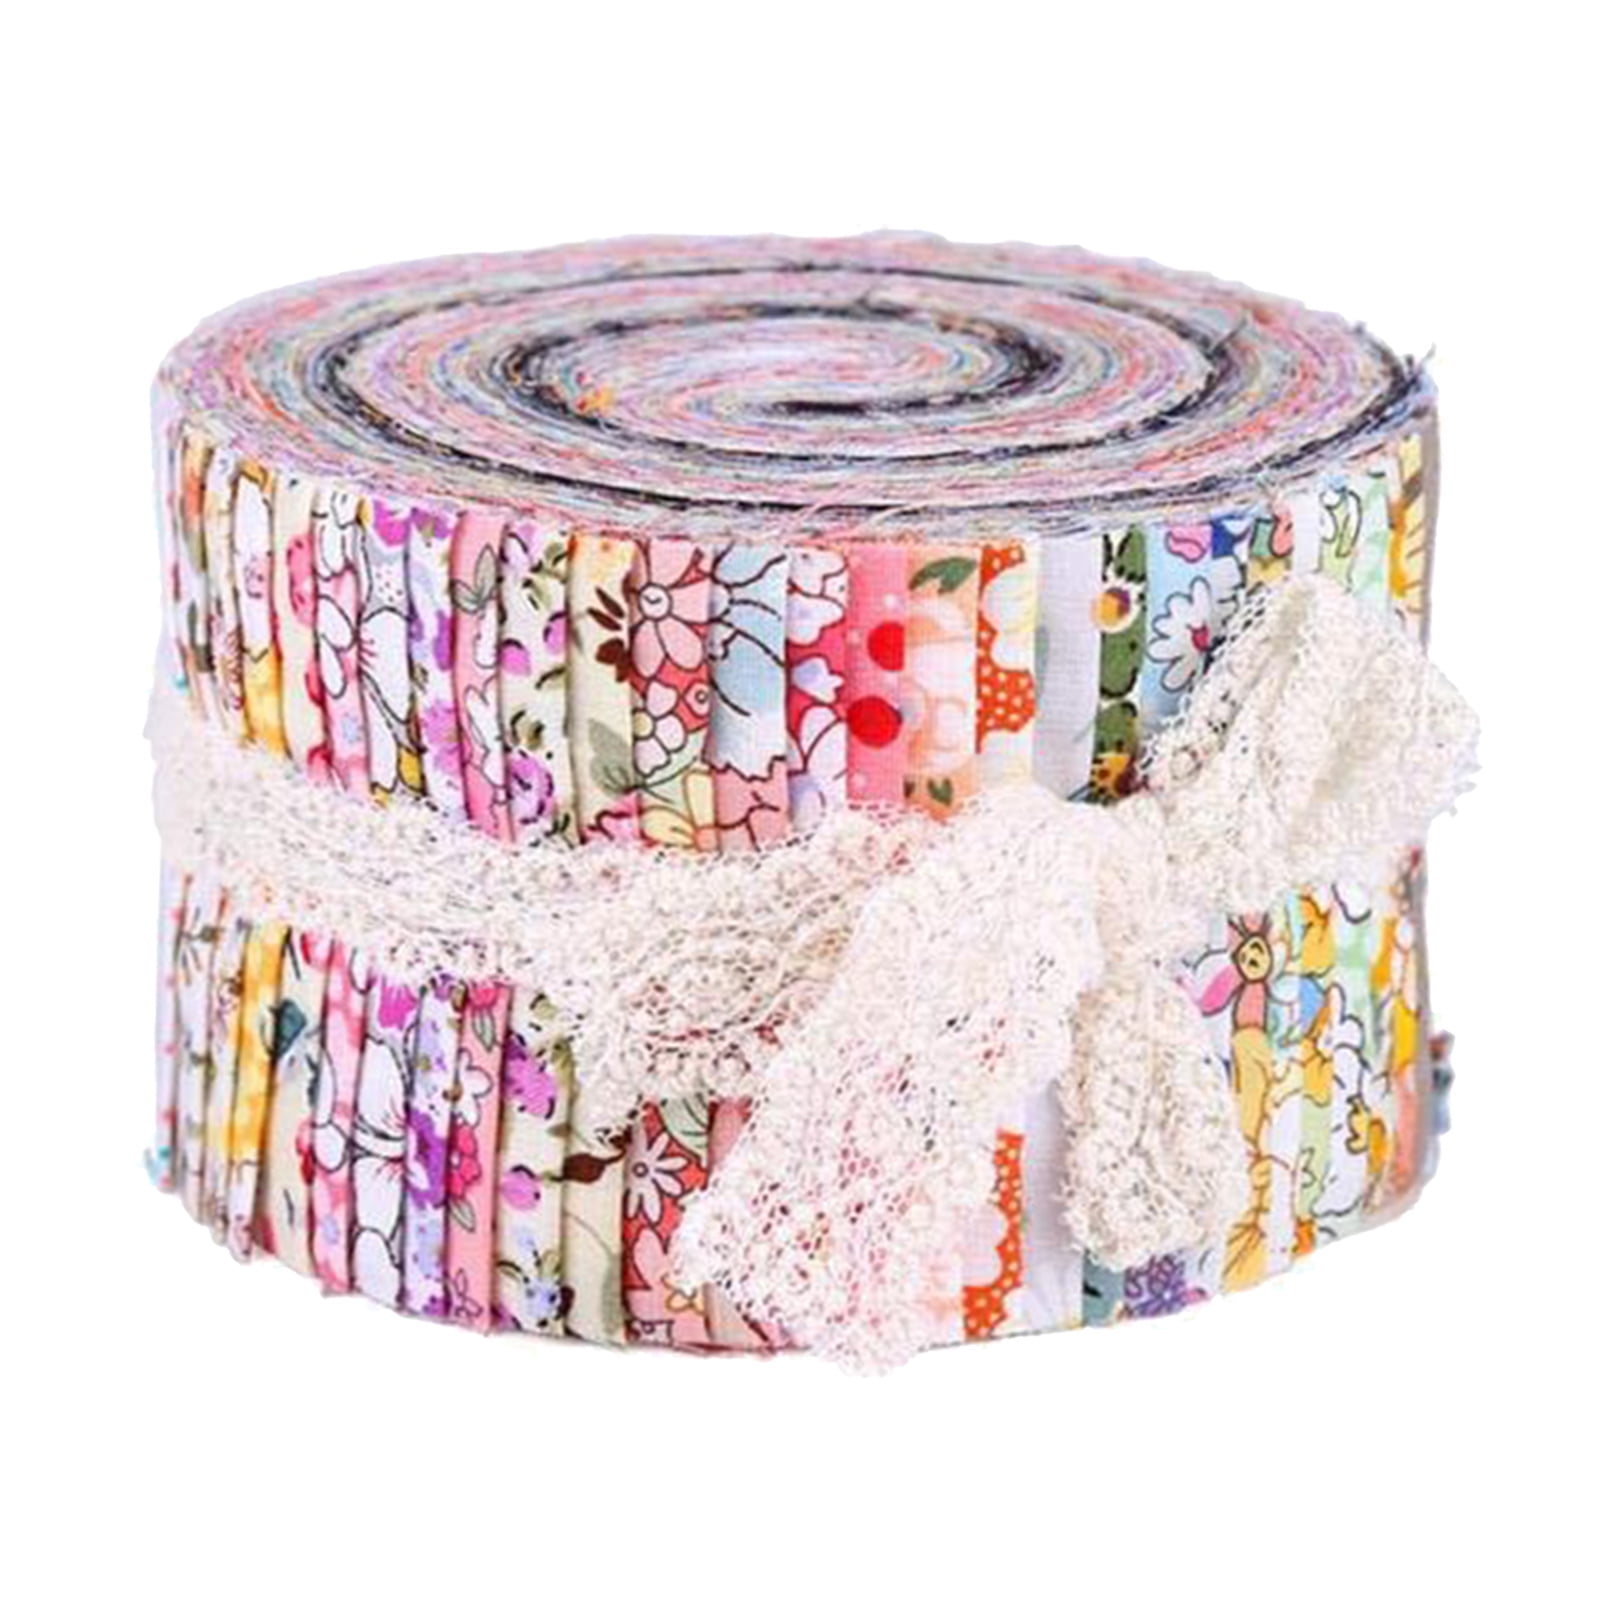 Booksew Ankara Fabric Cotton Fabric Floral Jelly Roll Strips 8-9